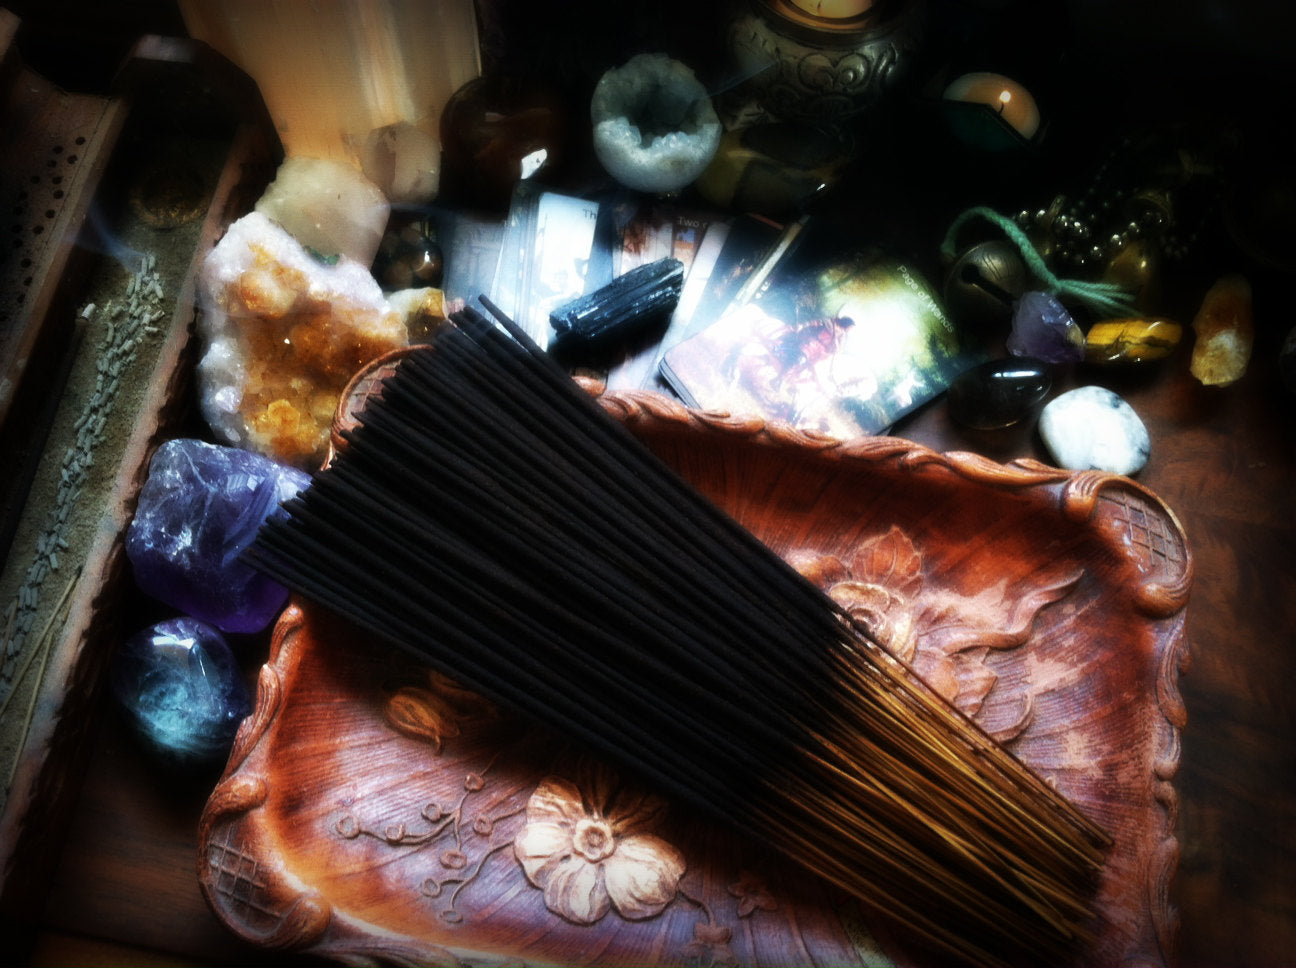 Copy of INCENSE ~ PRE-ORDER - Please Read Listing Thoroughly - Premium Quality Highly Fragranced Hand-Dipped Sticks